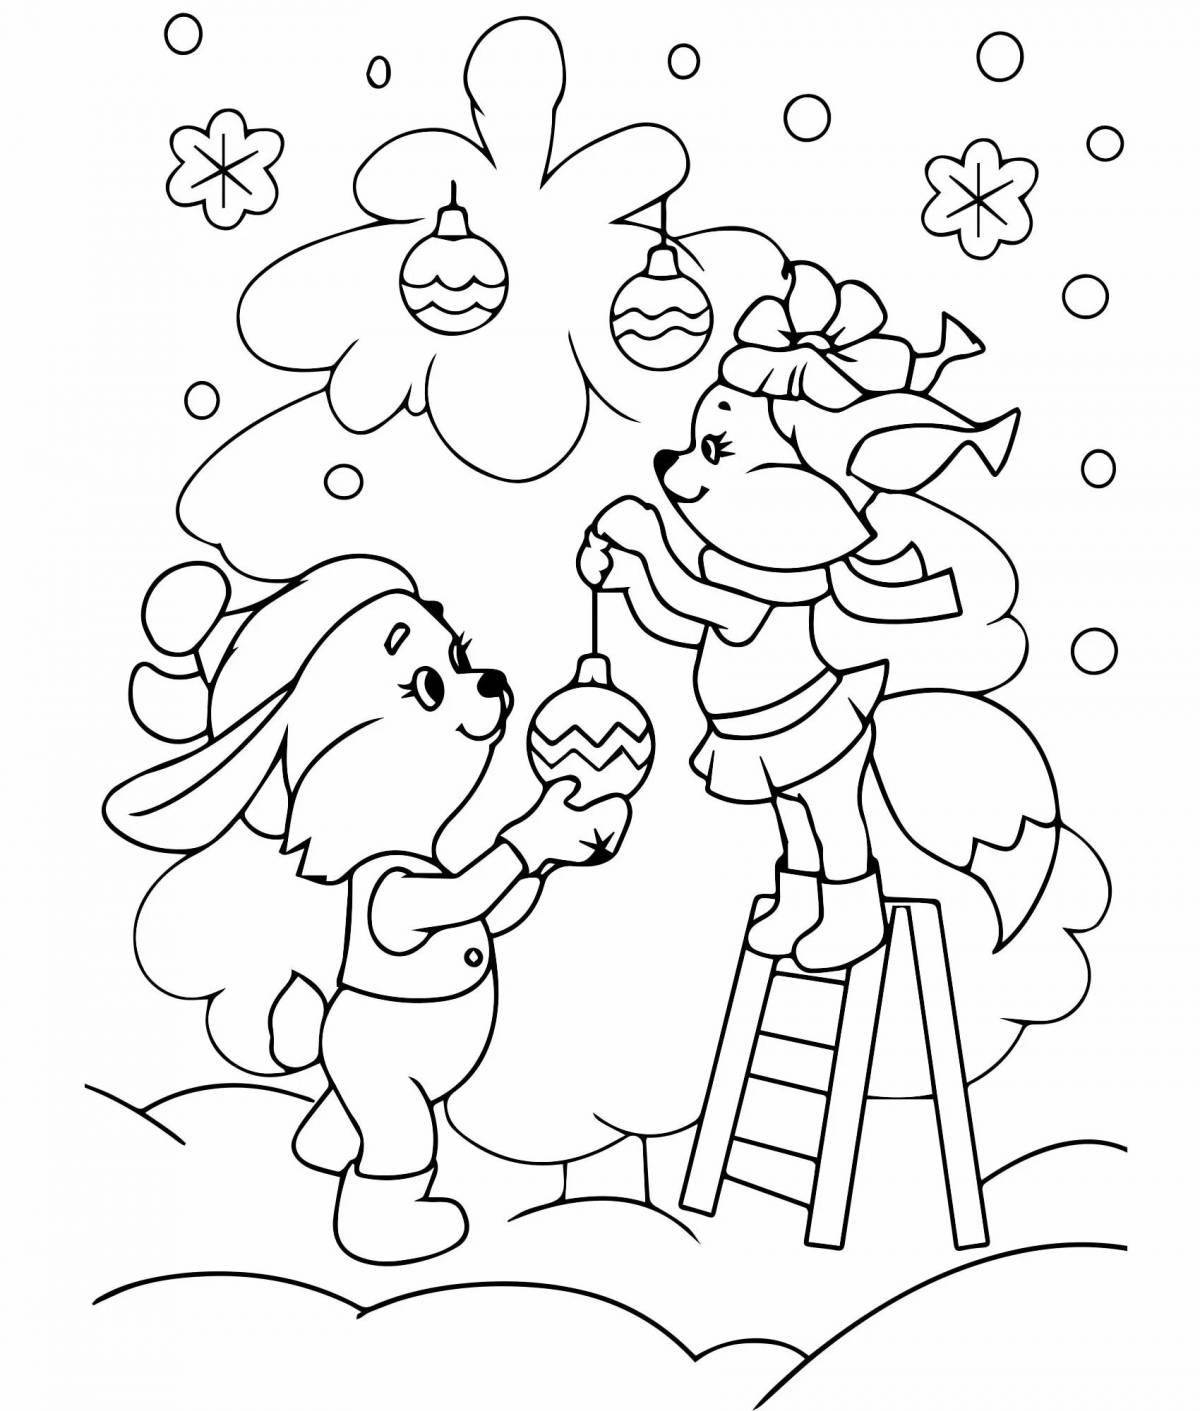 Glorious Christmas coloring book for kids